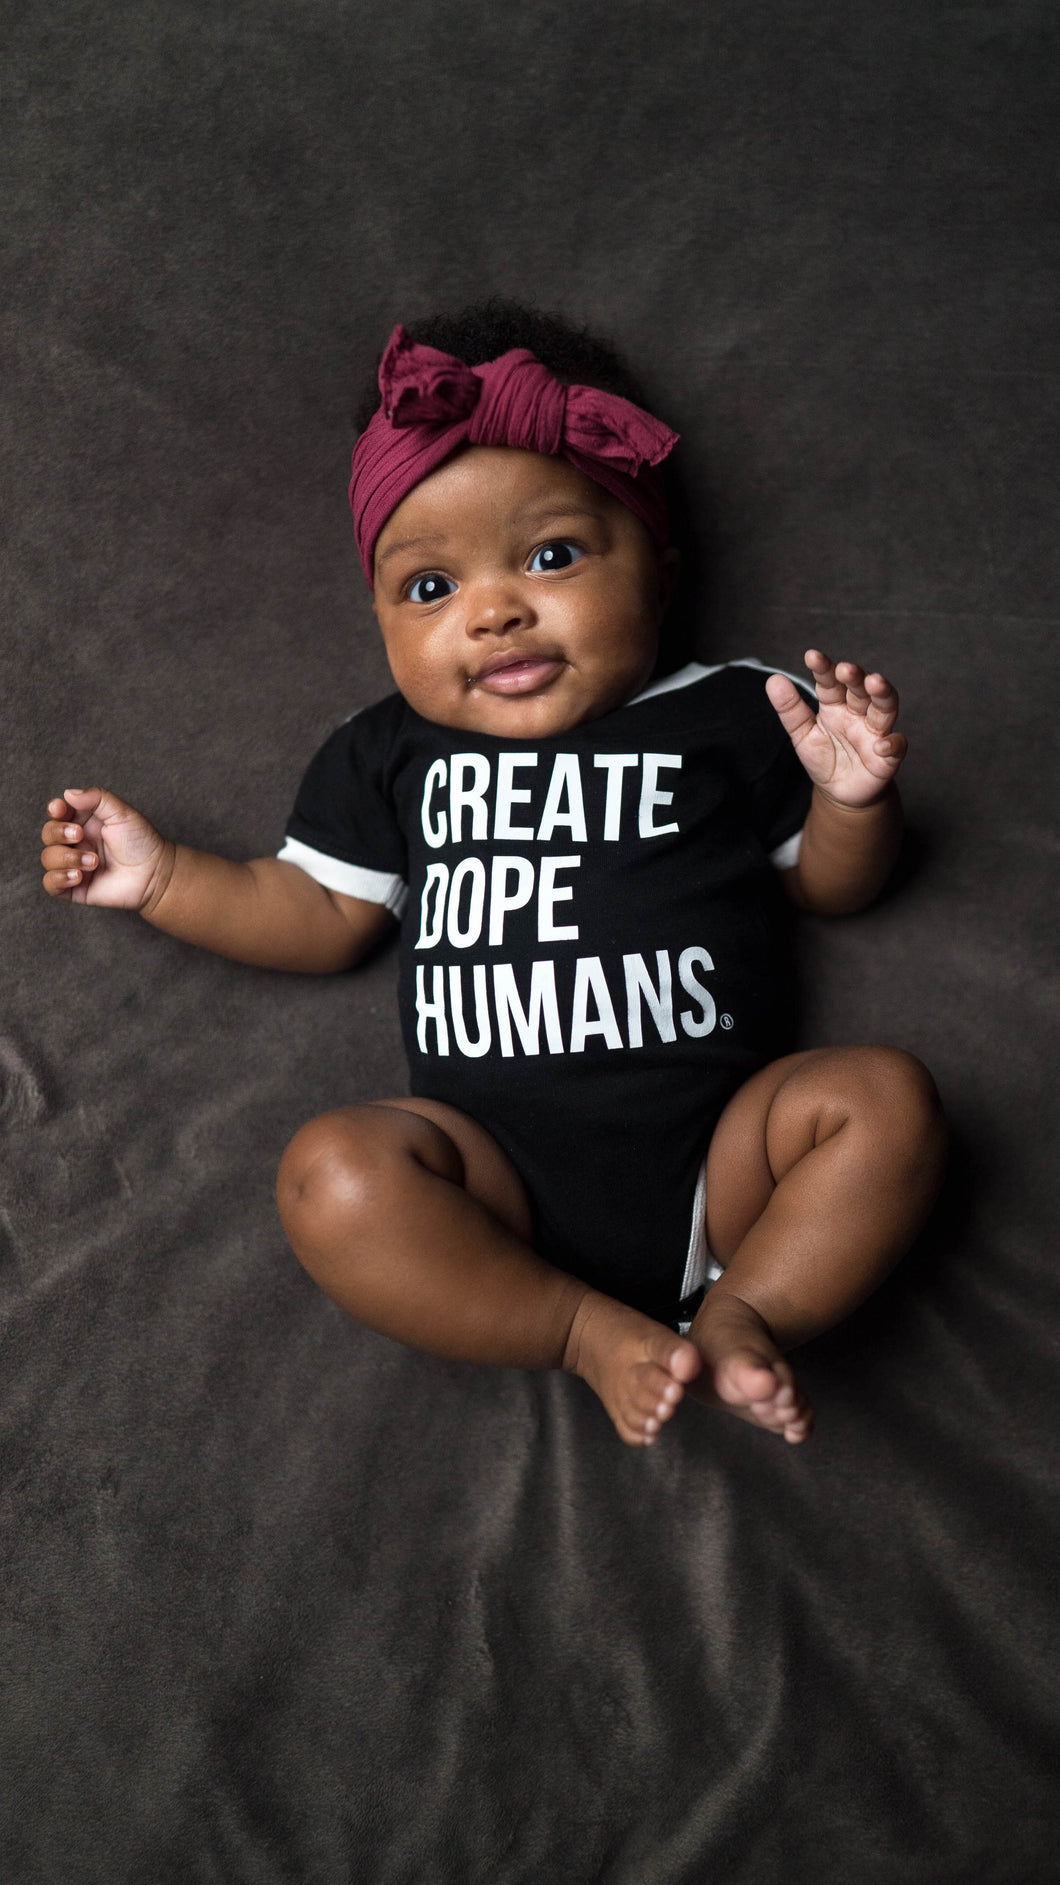 Kids and Infants - Create Dope Humans